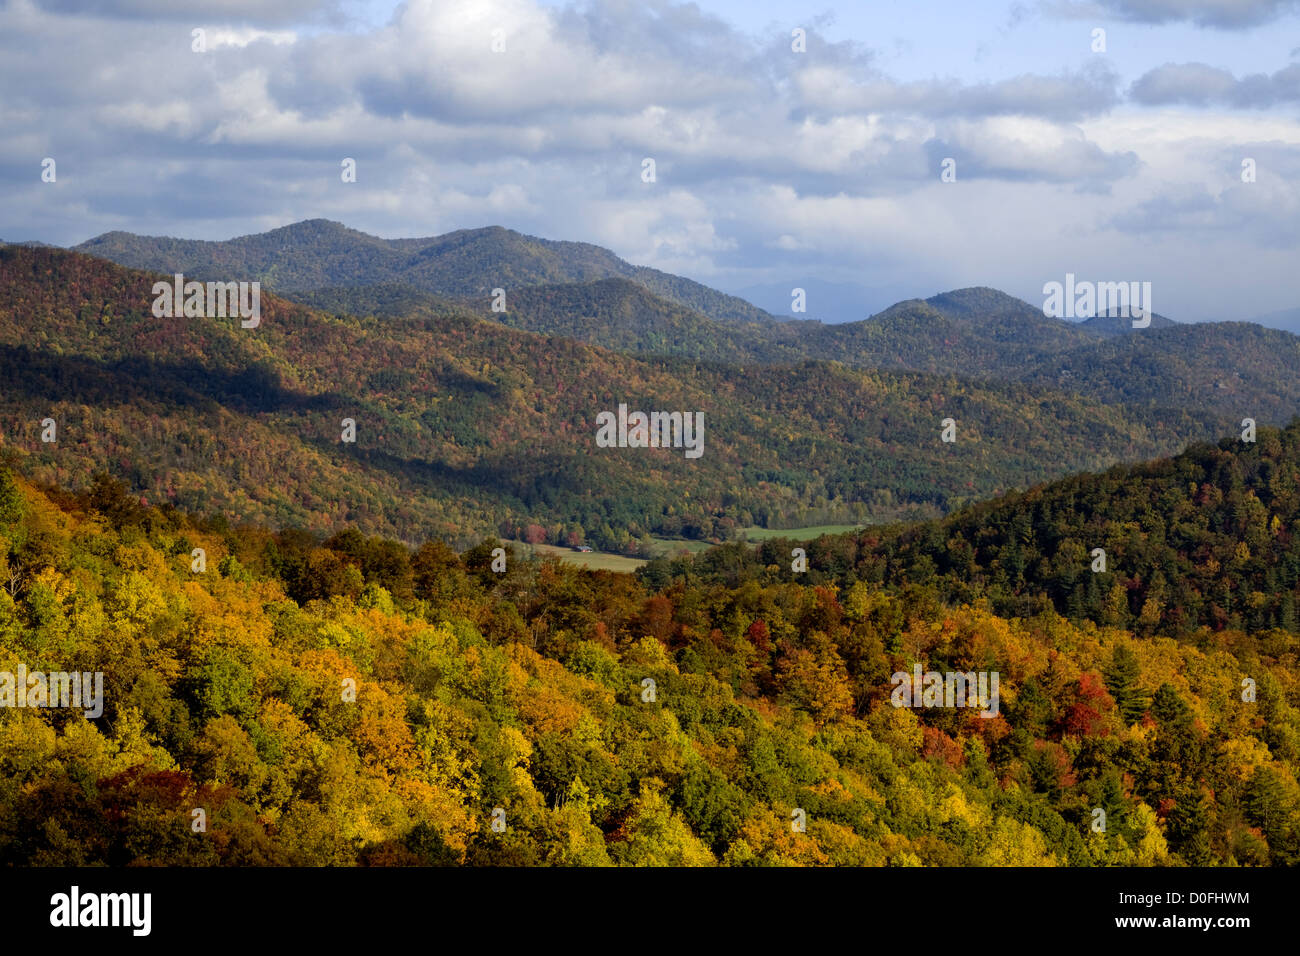 GA00042-00...GEORGIA - View over the fall colored hills of the Blue Ridge Mountains from Black Rock Mountain State Park. Stock Photo